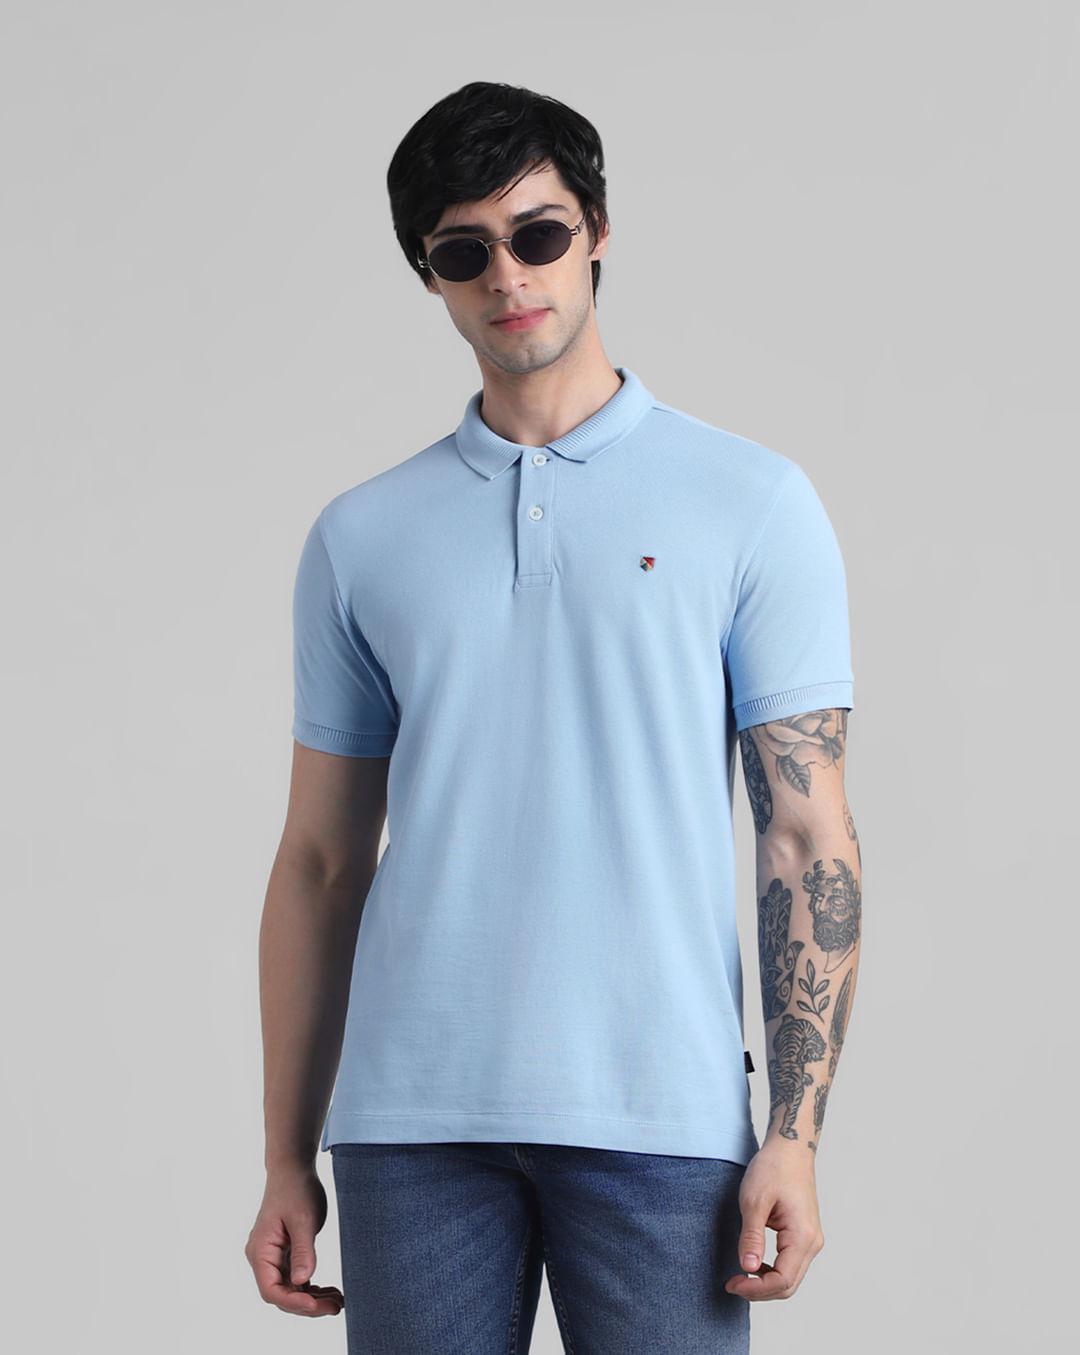 light blue knitted polo t-shirt